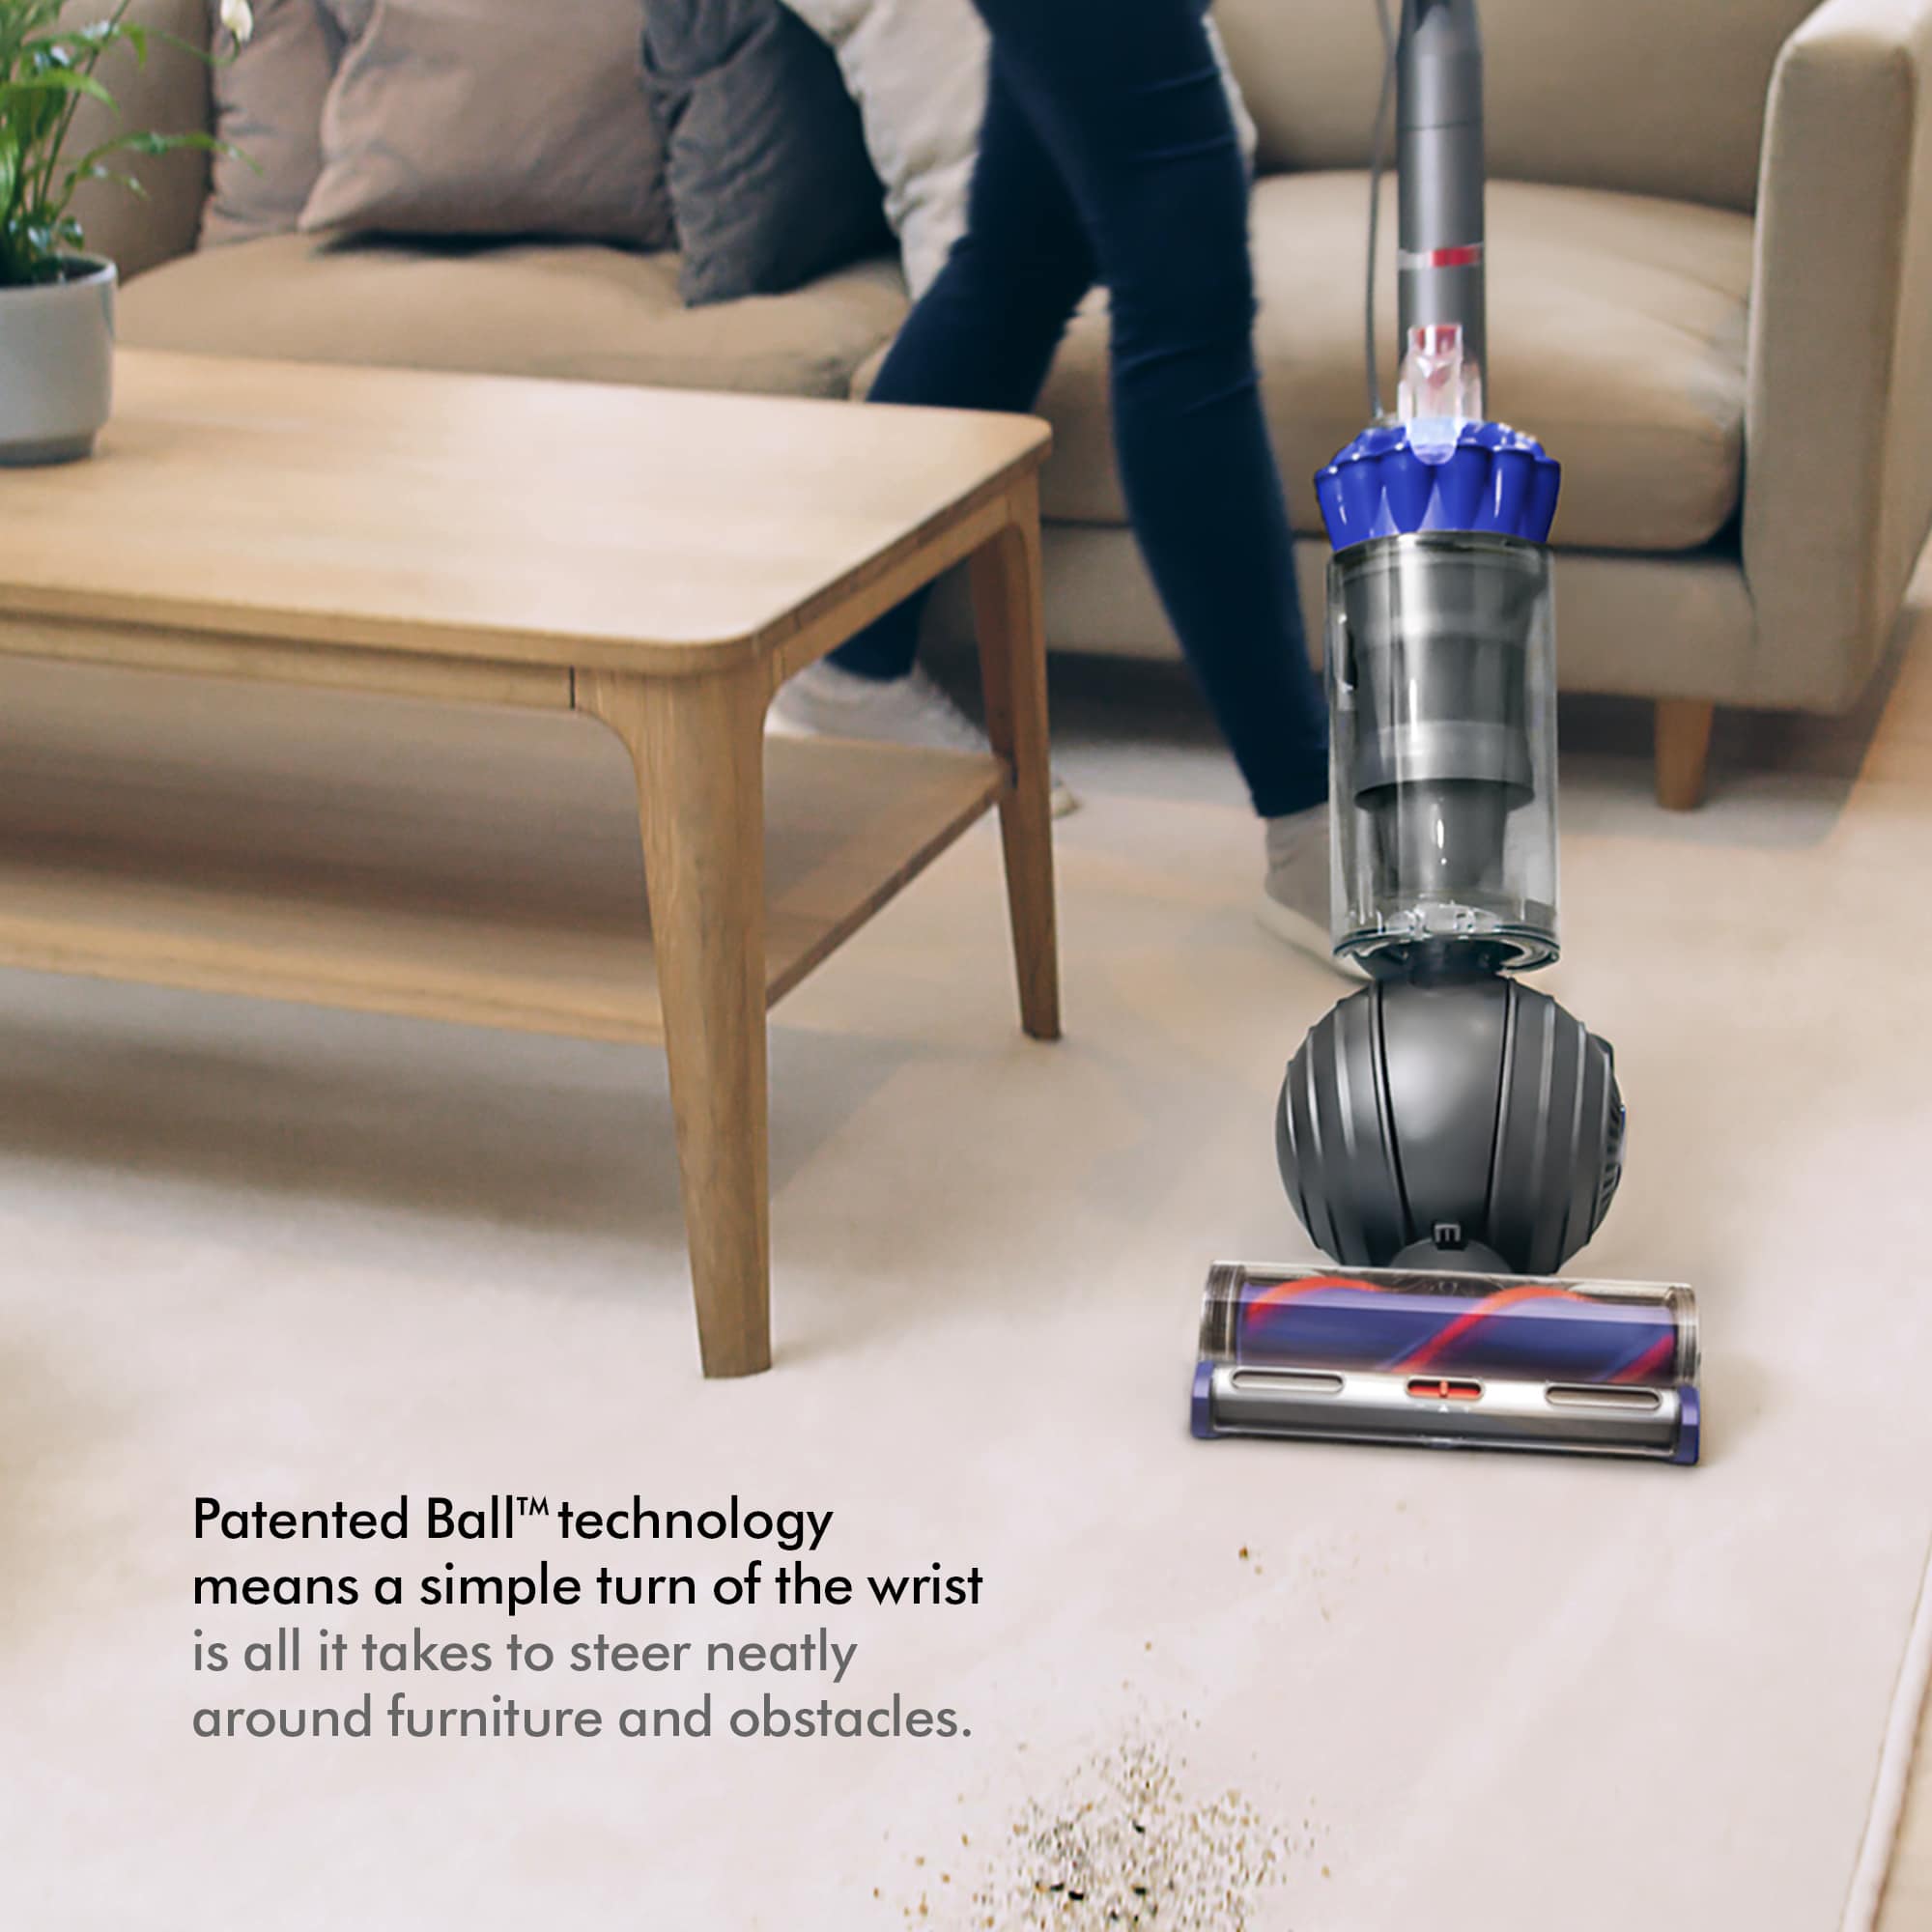 Dyson Small Ball Allergy Bagless Upright Vacuum Cleaner